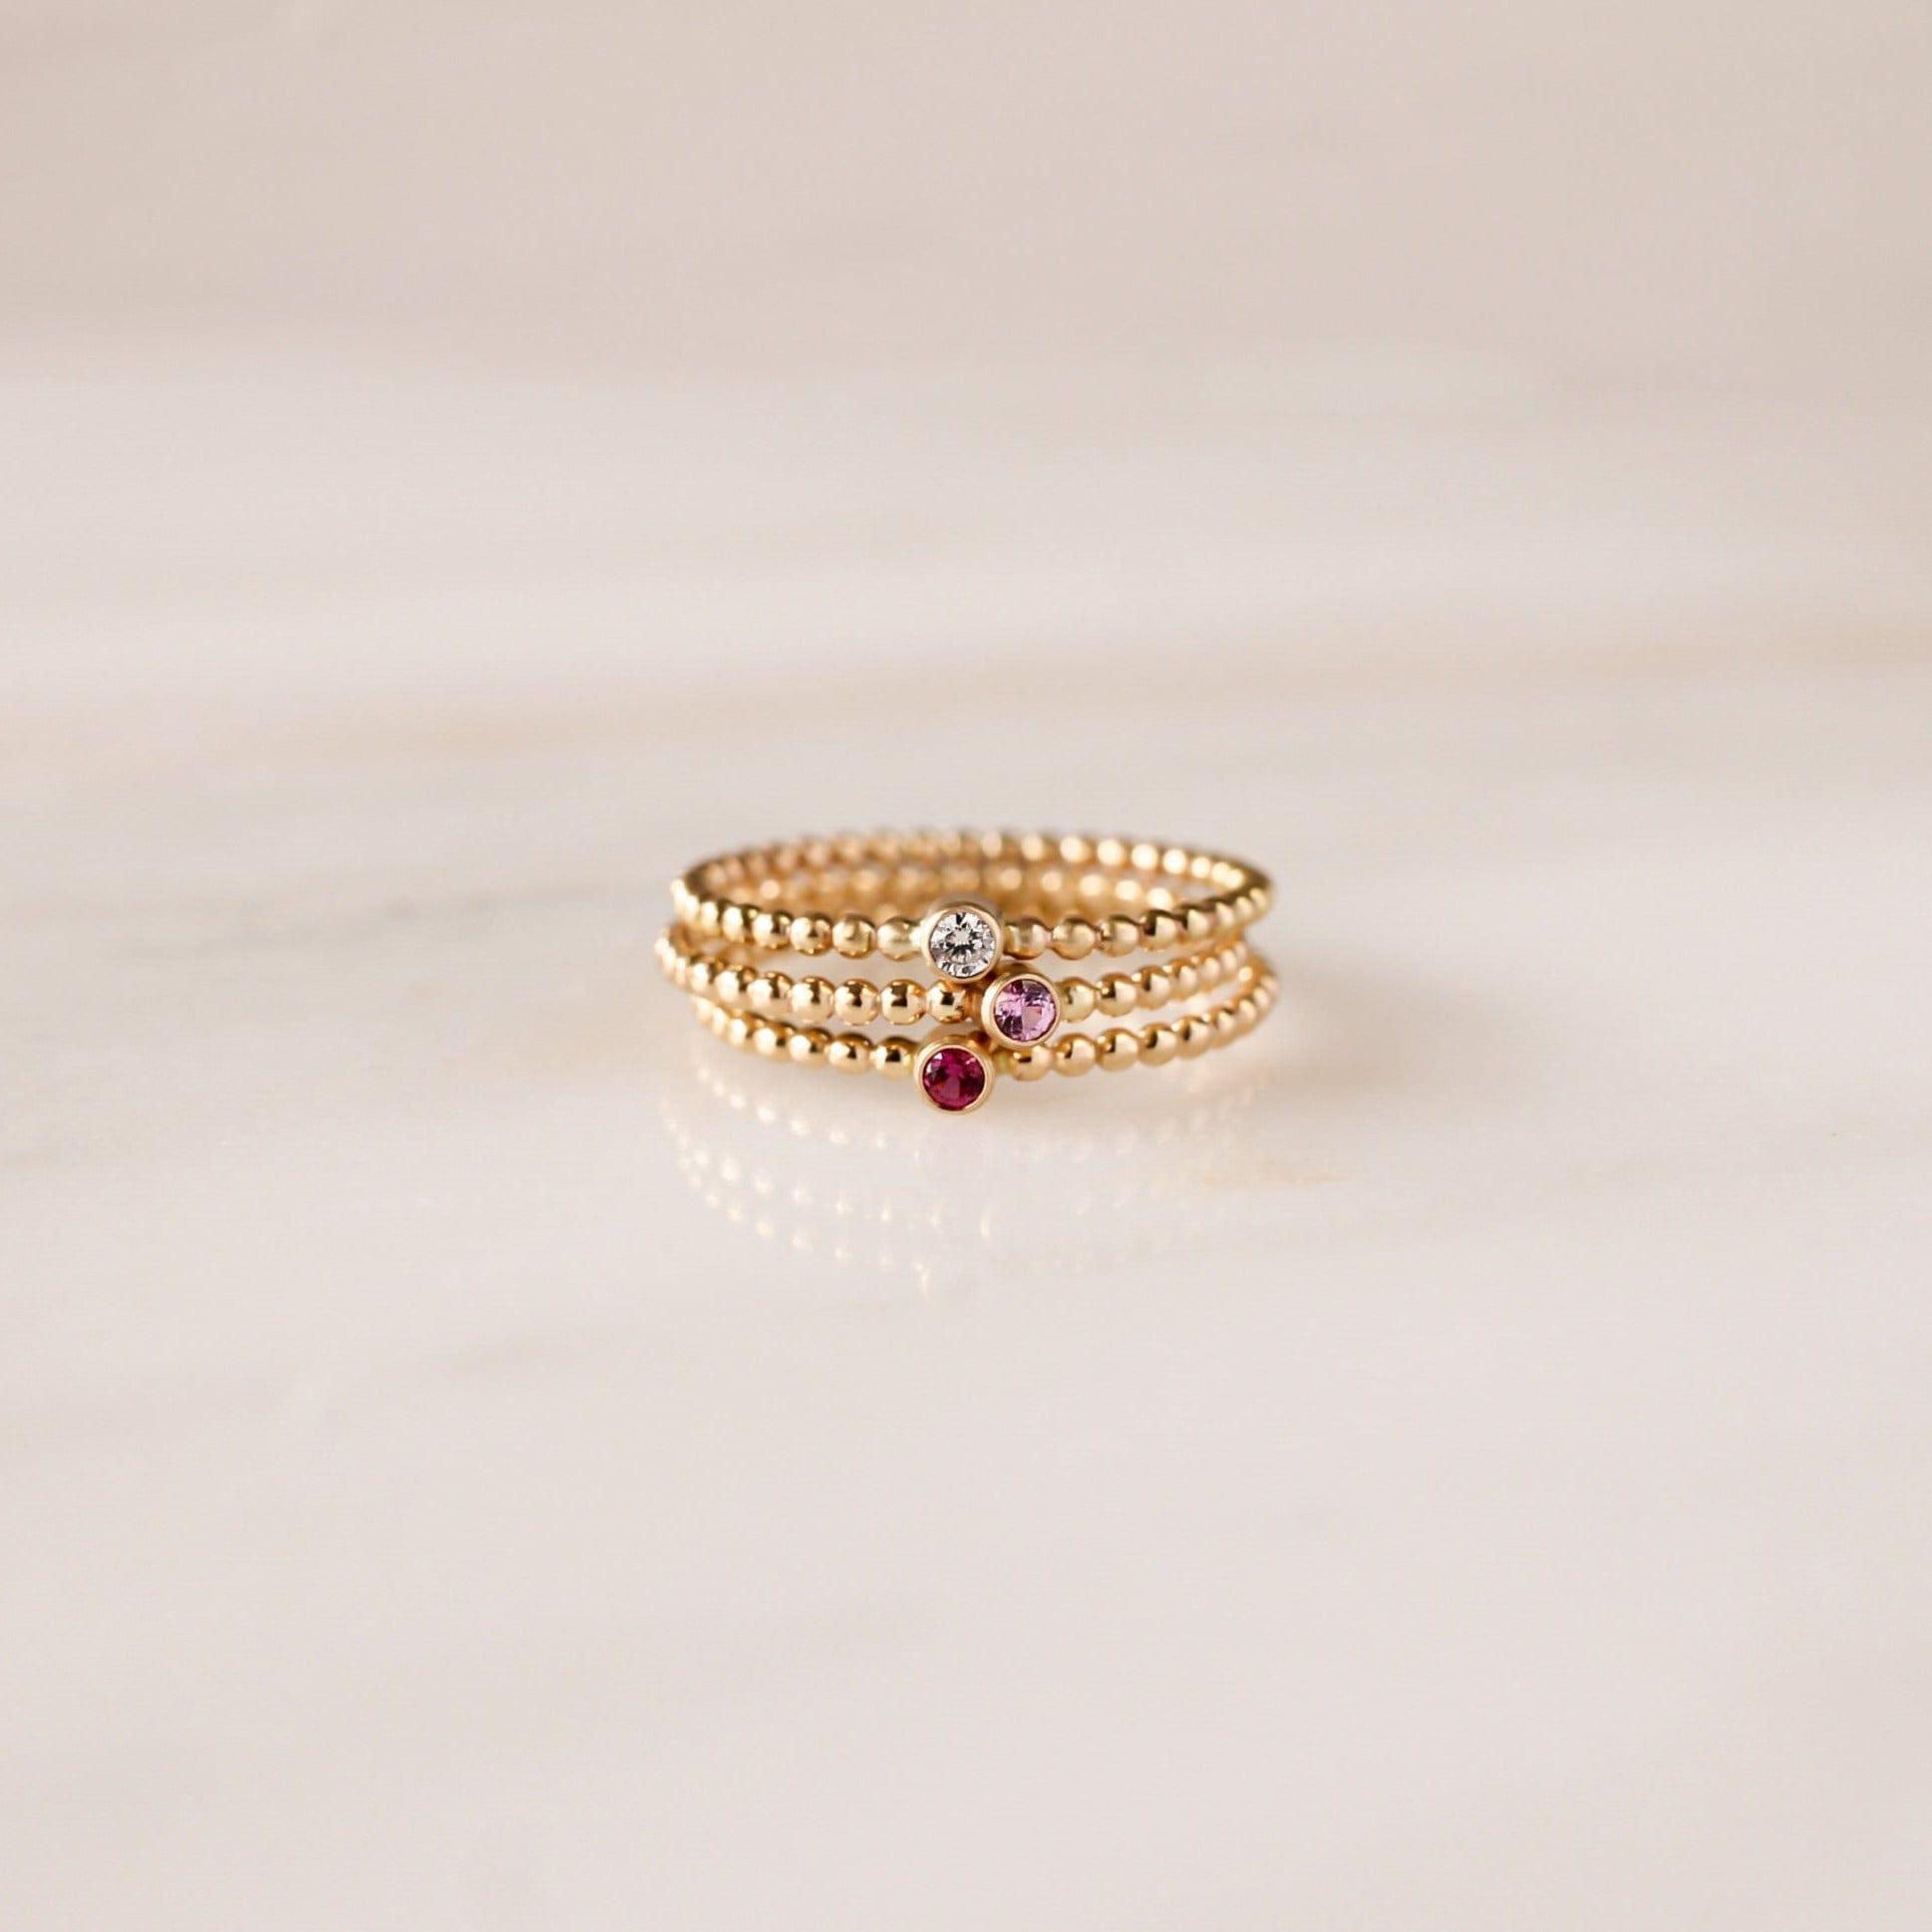 Tiny Mia Birthstone Ring - Nolia Jewelry - Meaningful + Sustainably Handcrafted Jewelry